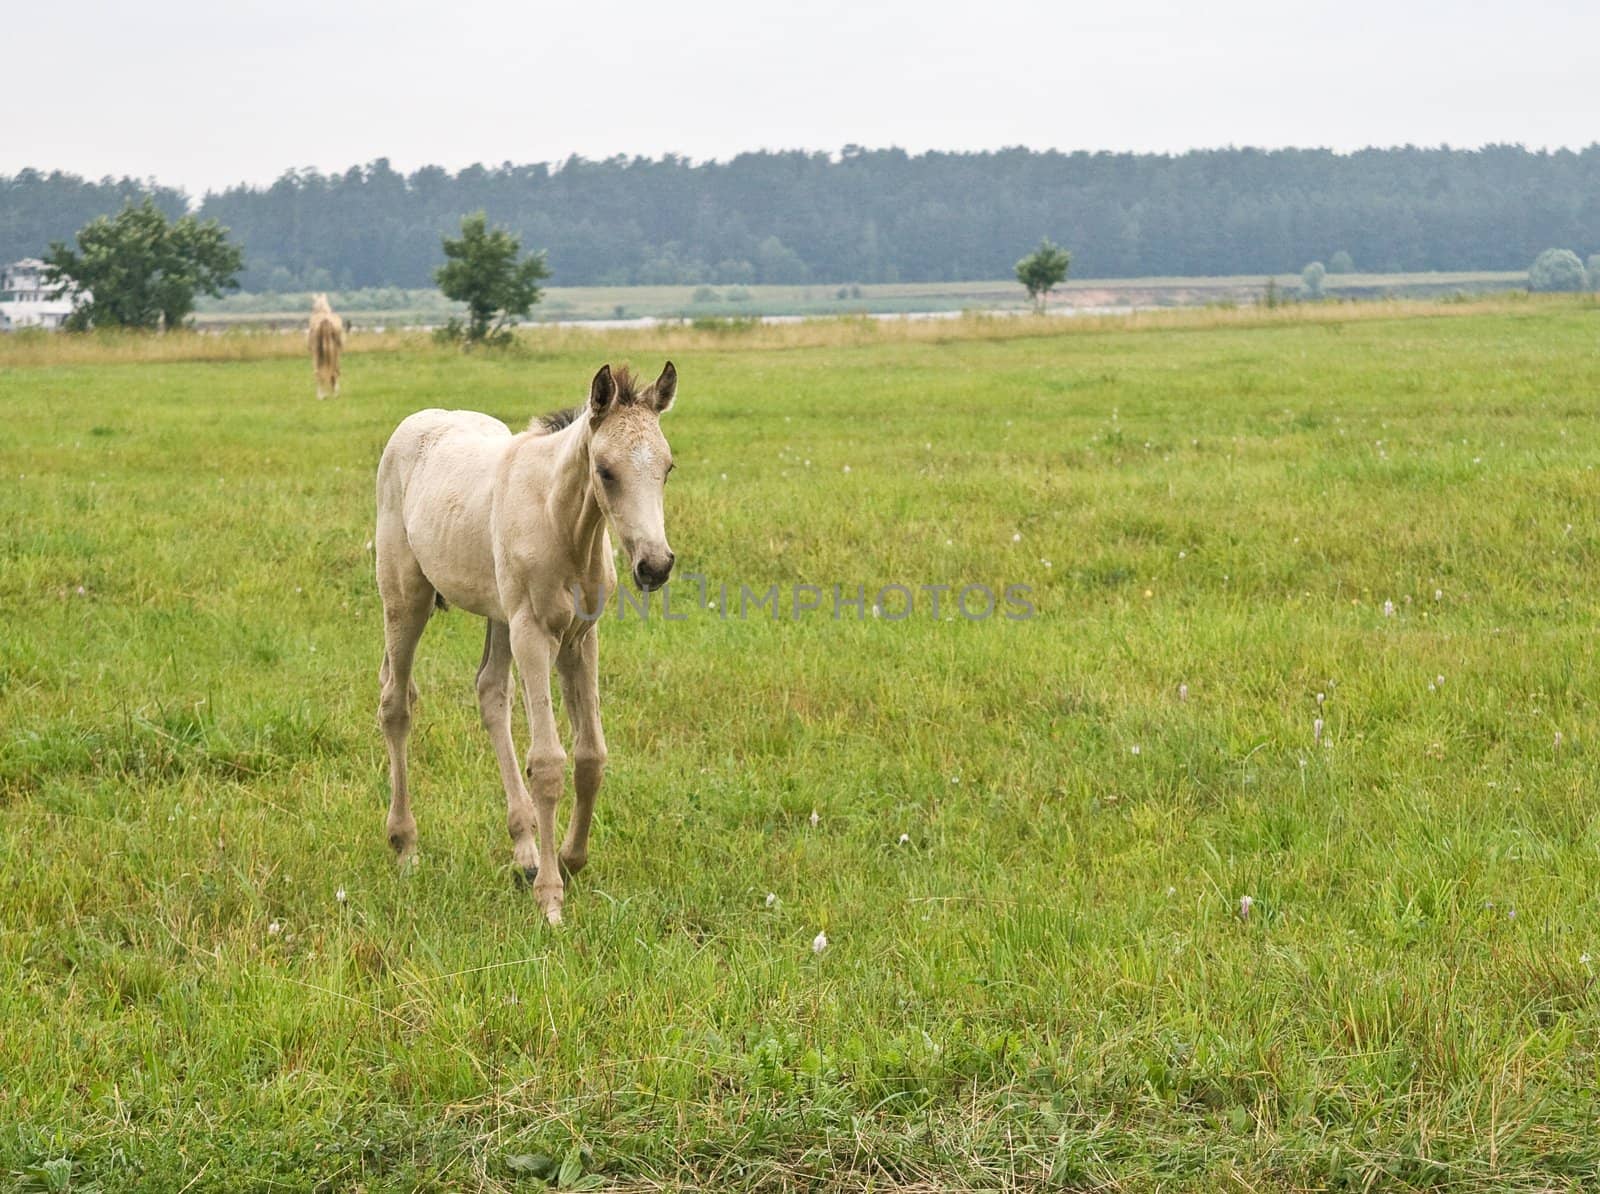 Young white foal standing on a field road